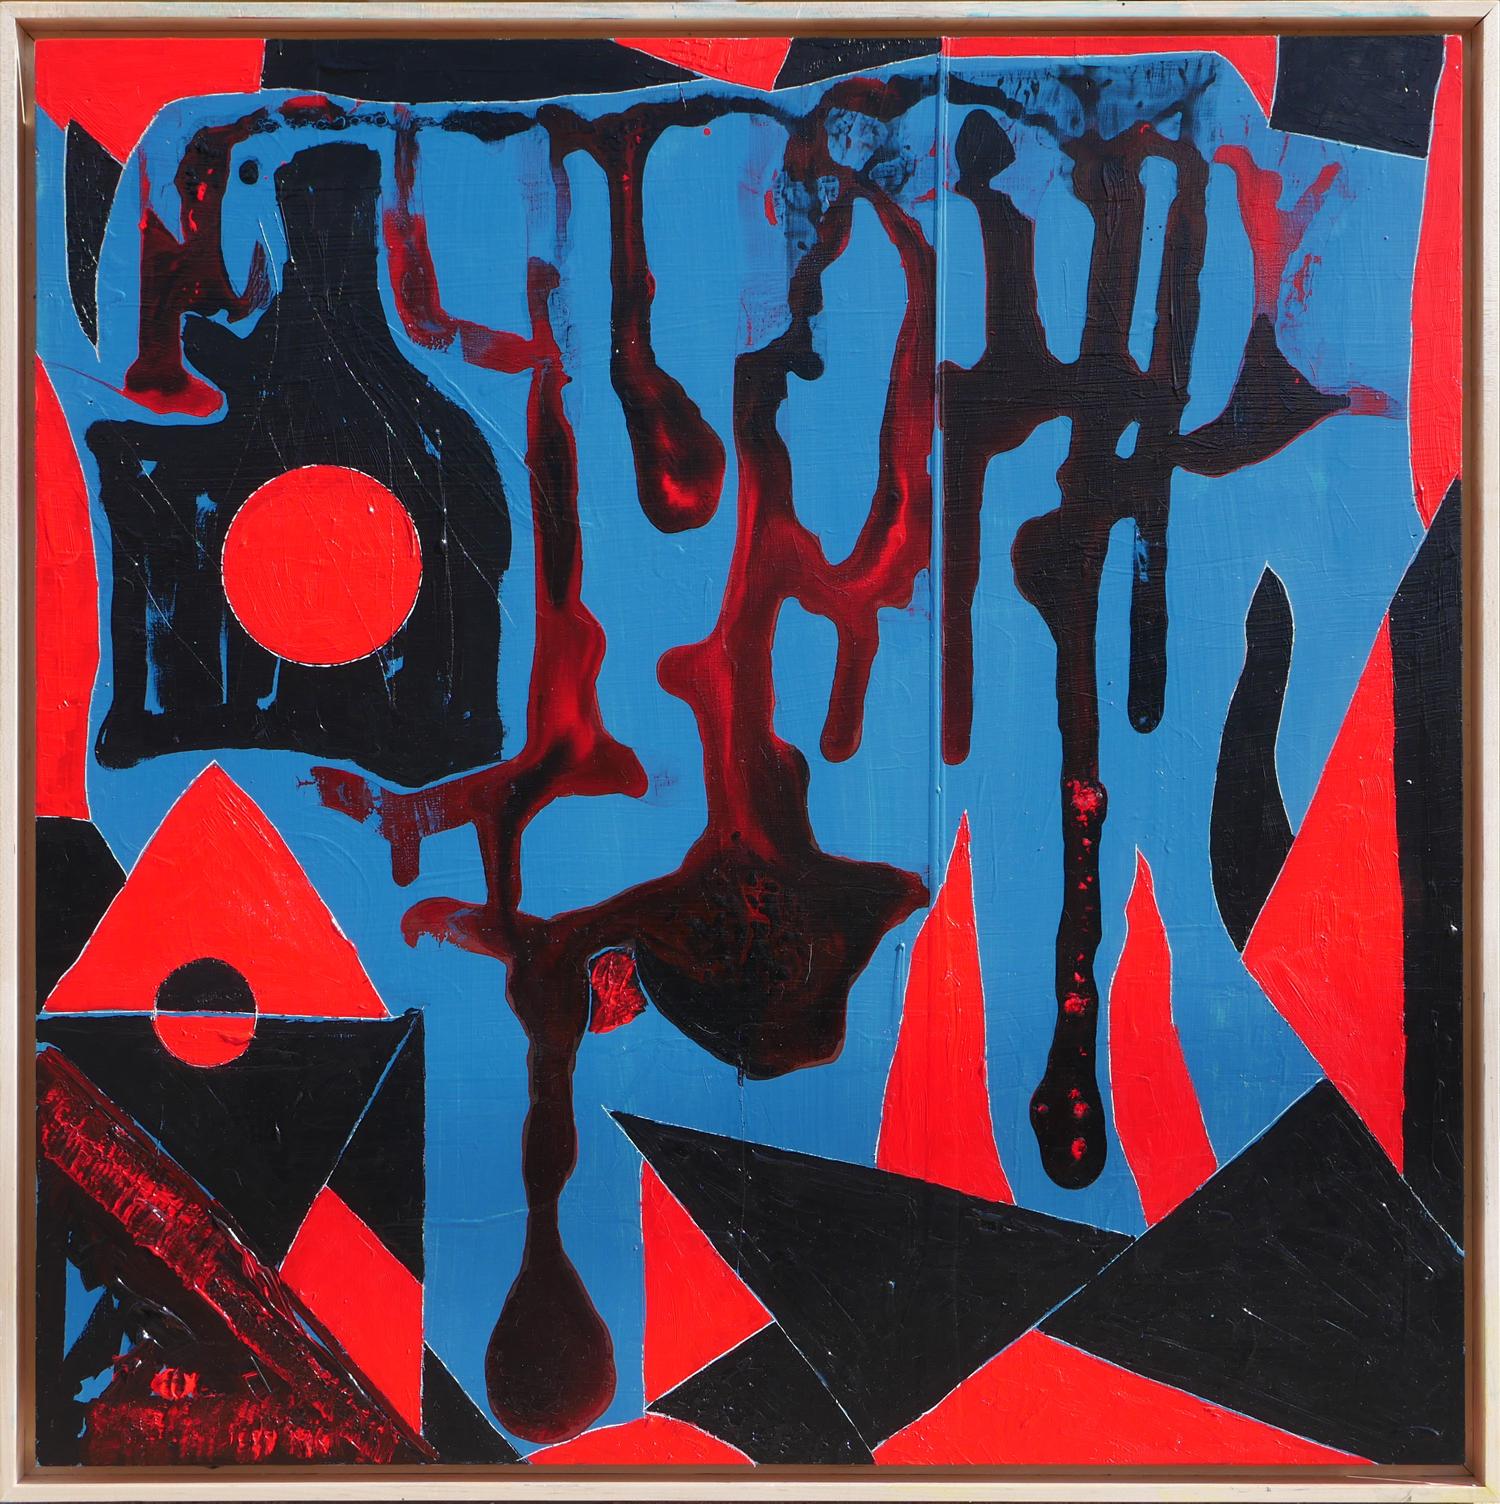 Blue and red geometric abstract painting by Houston, Texas artist Paul Reeves. The work features a variety of flowy and angular shapes in black and red against a sky-blue background. Signed by the artist on the back. 

Dimensions Without Frame: H